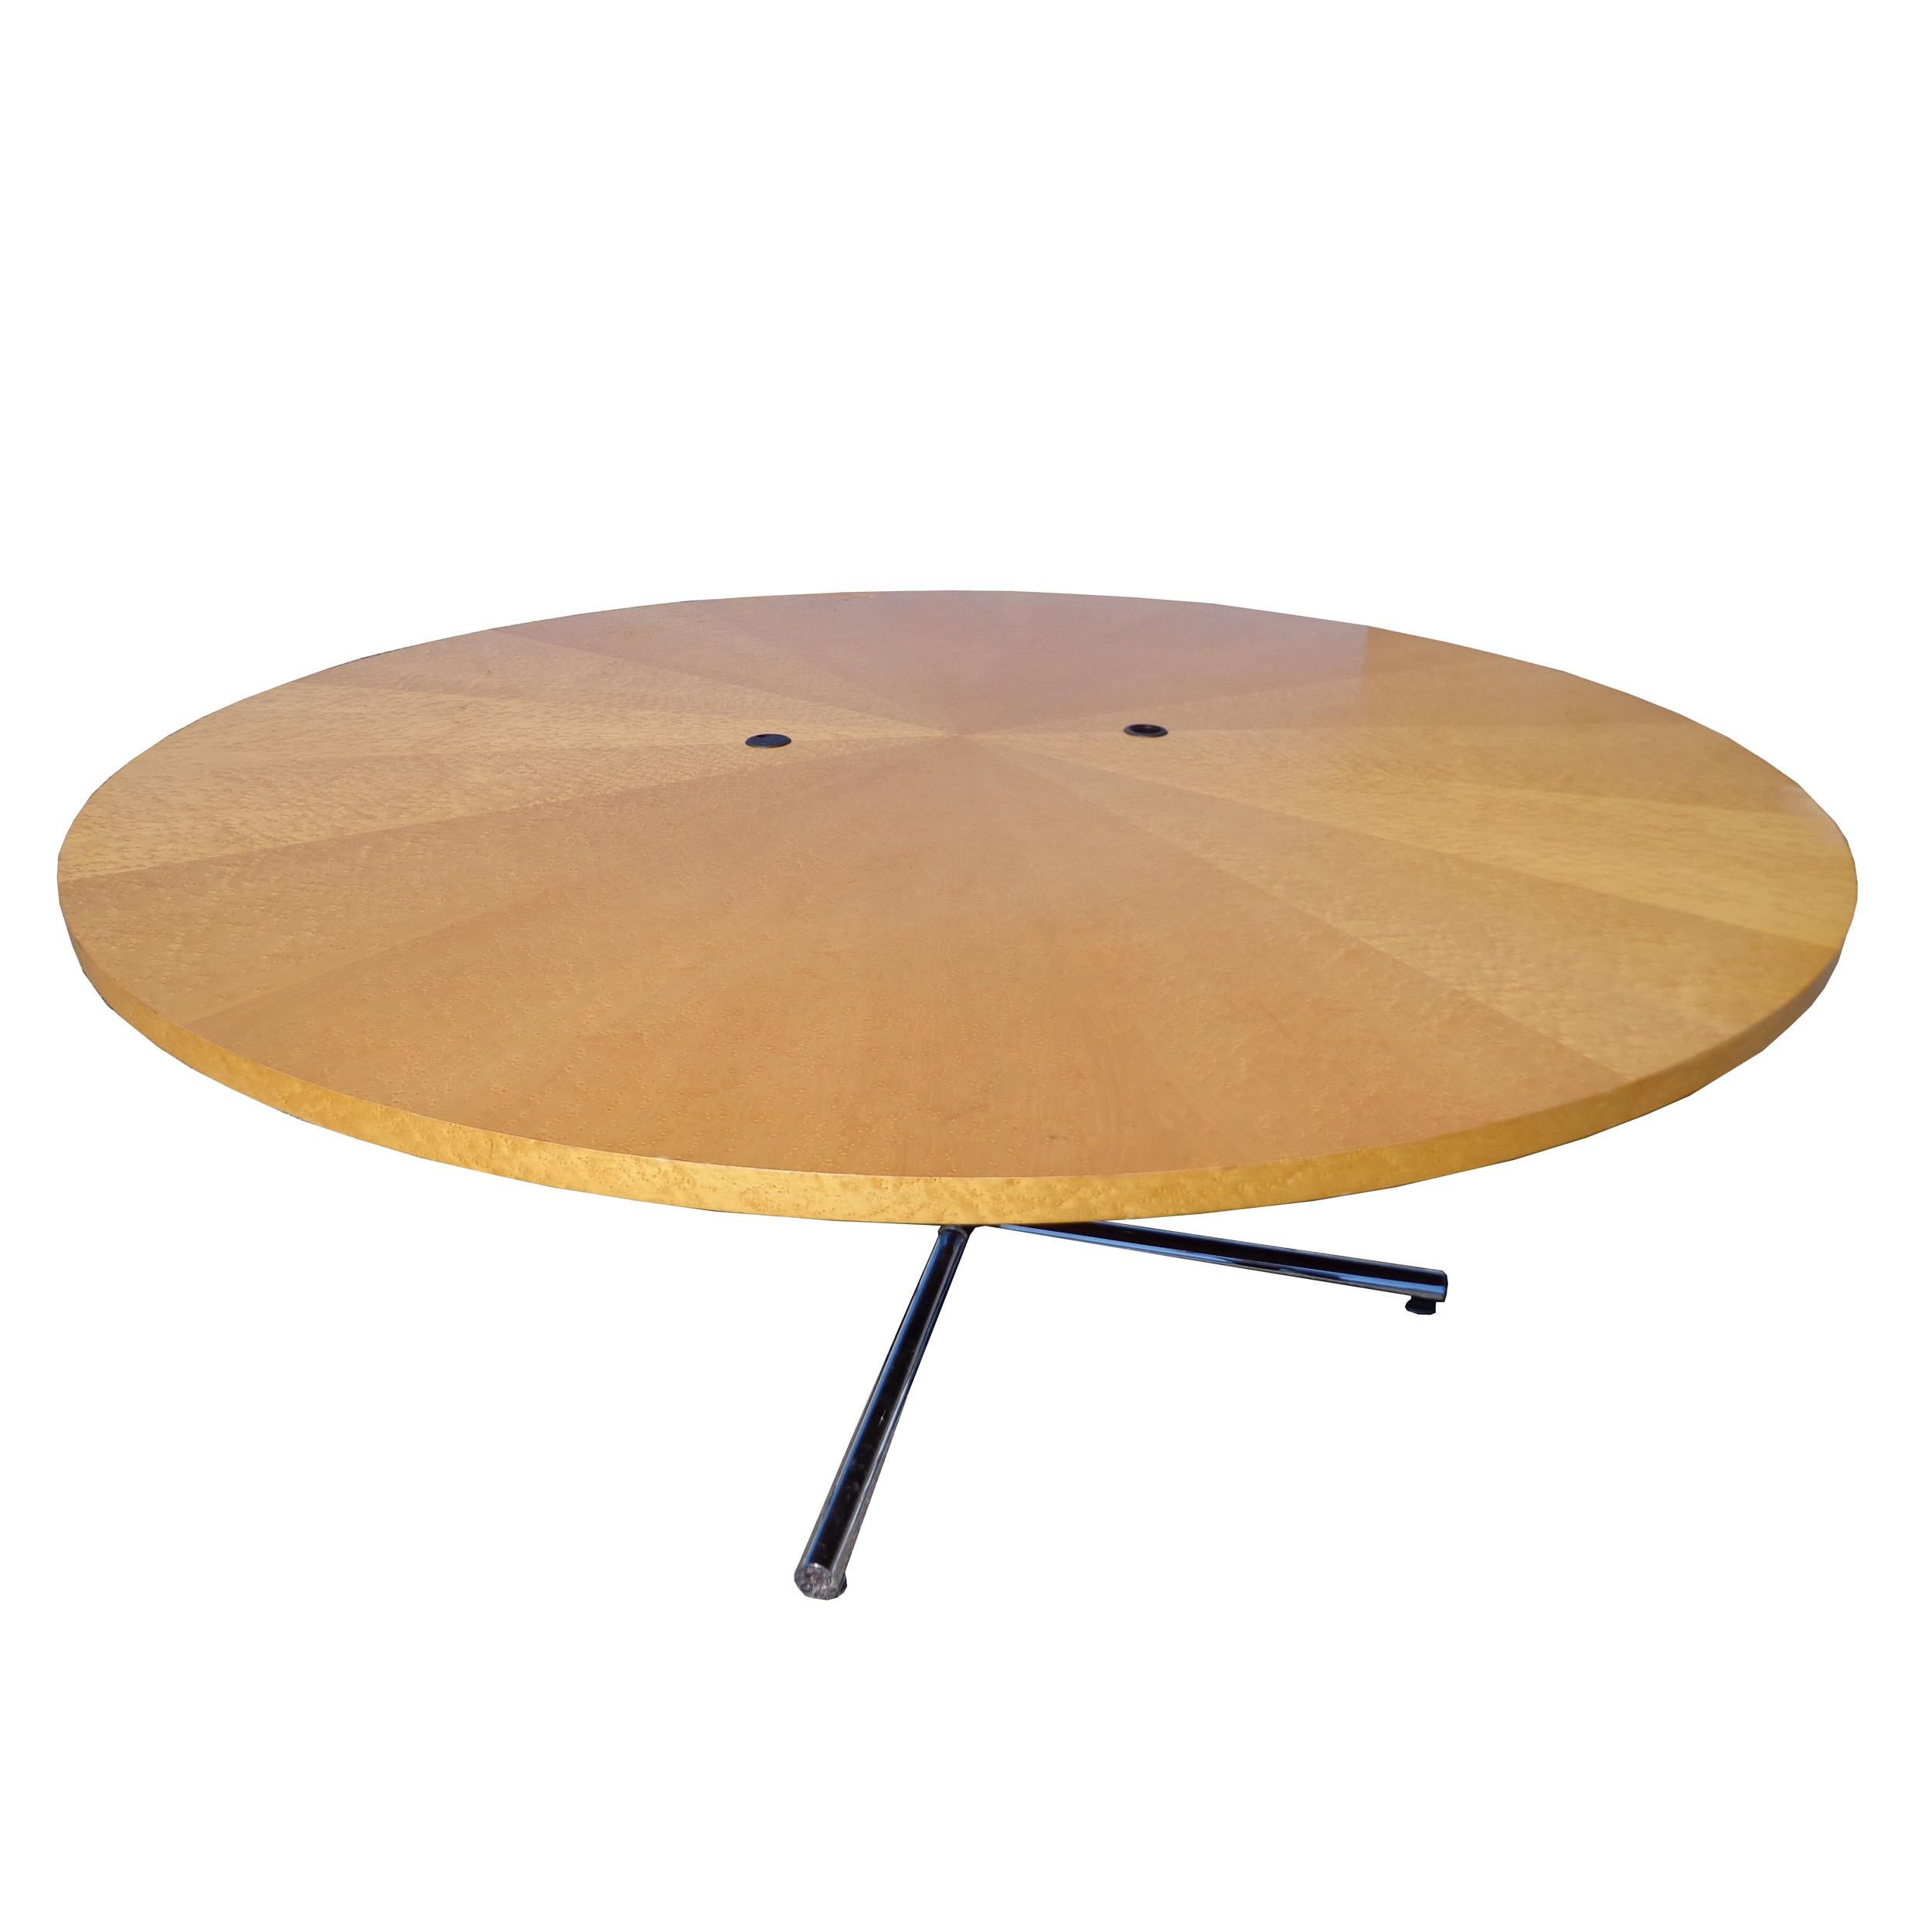 North American Birdseye Maple Knoll Reff Conference Table For Sale